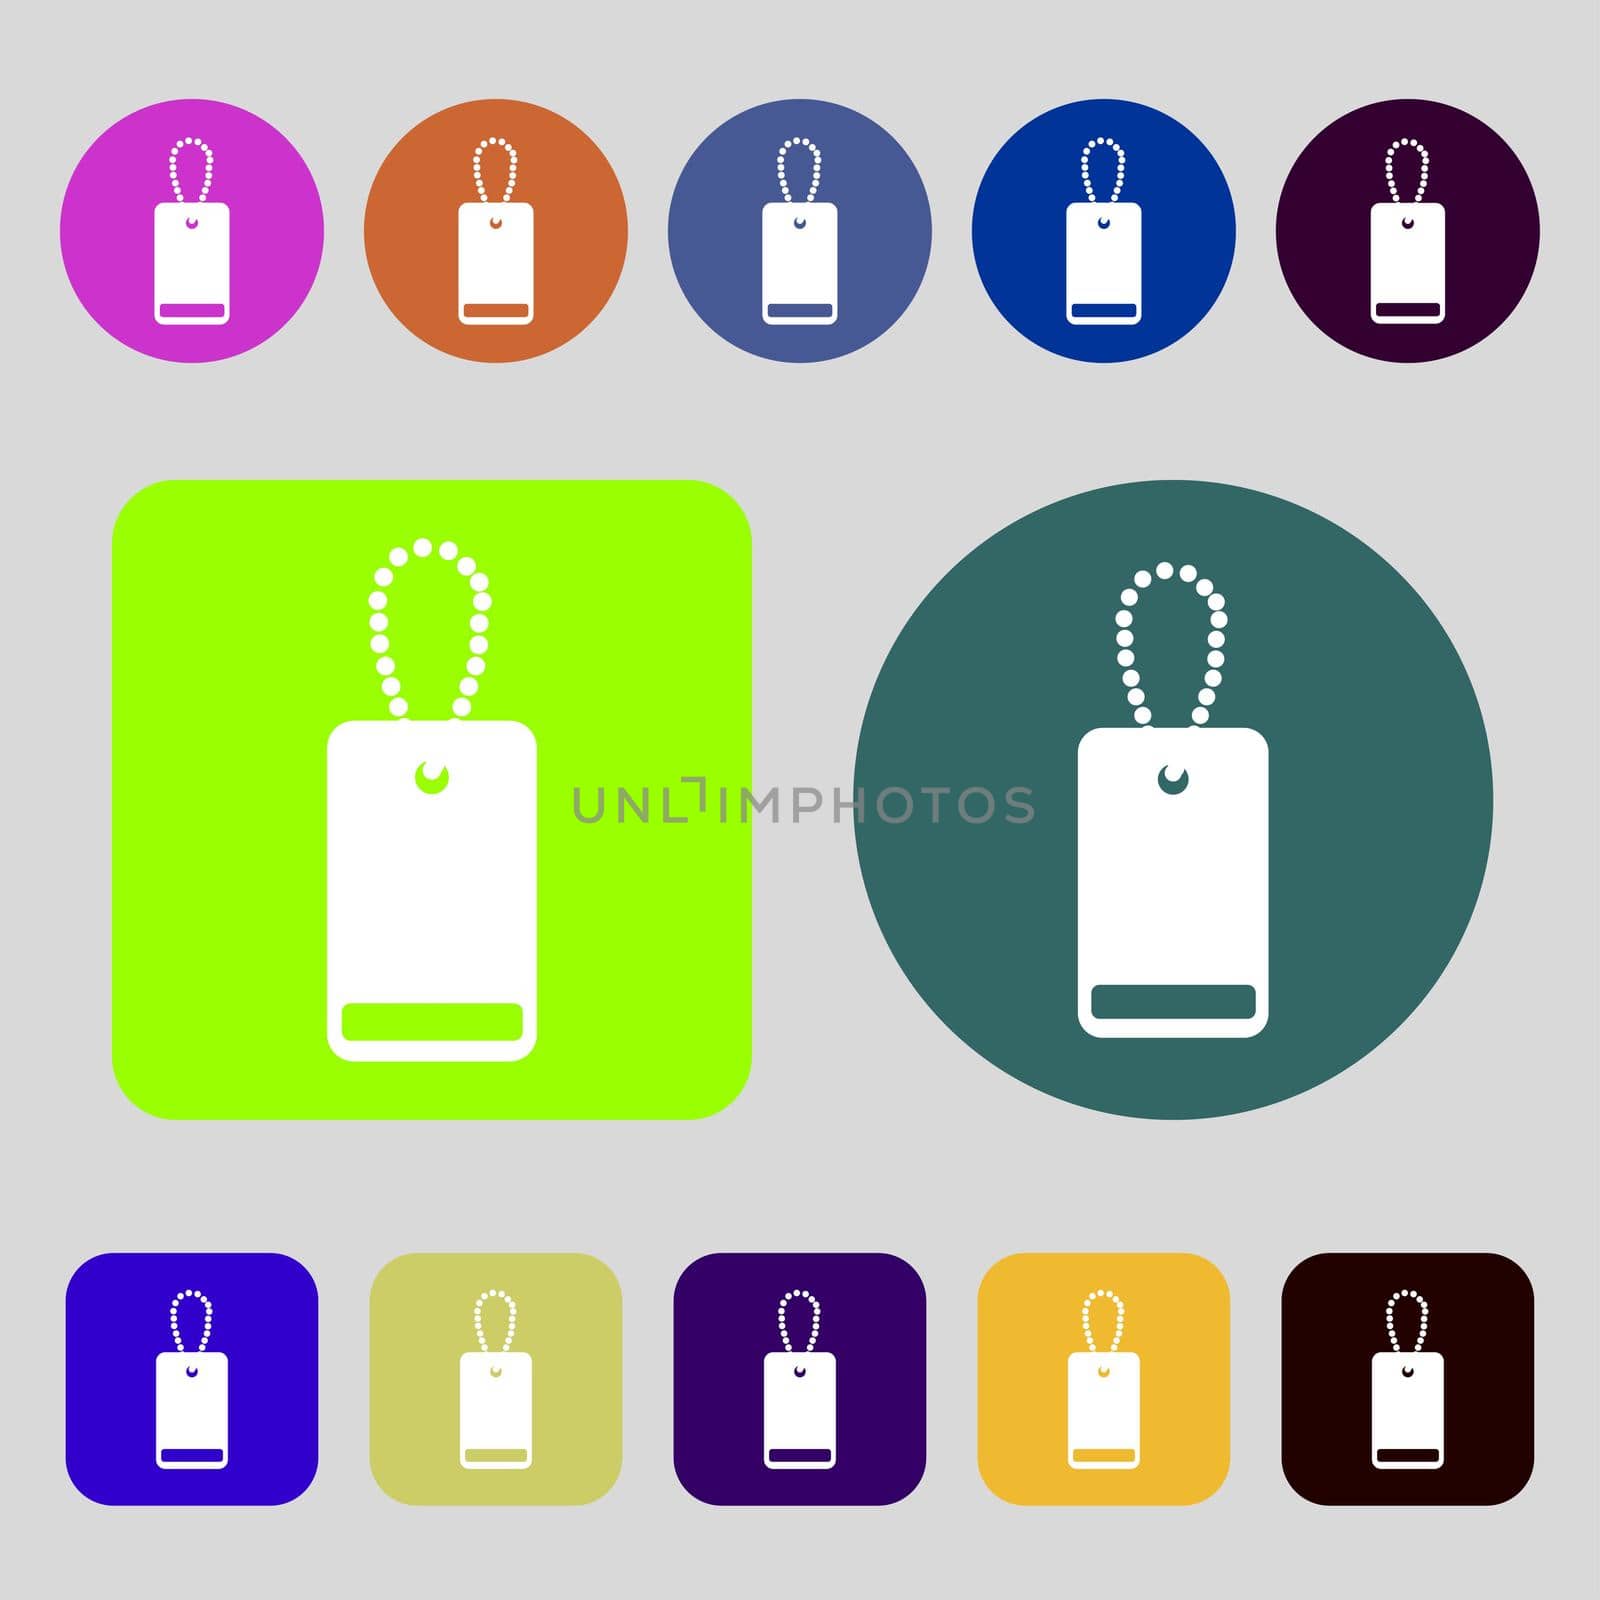 army chains icon sign.12 colored buttons. Flat design. illustration